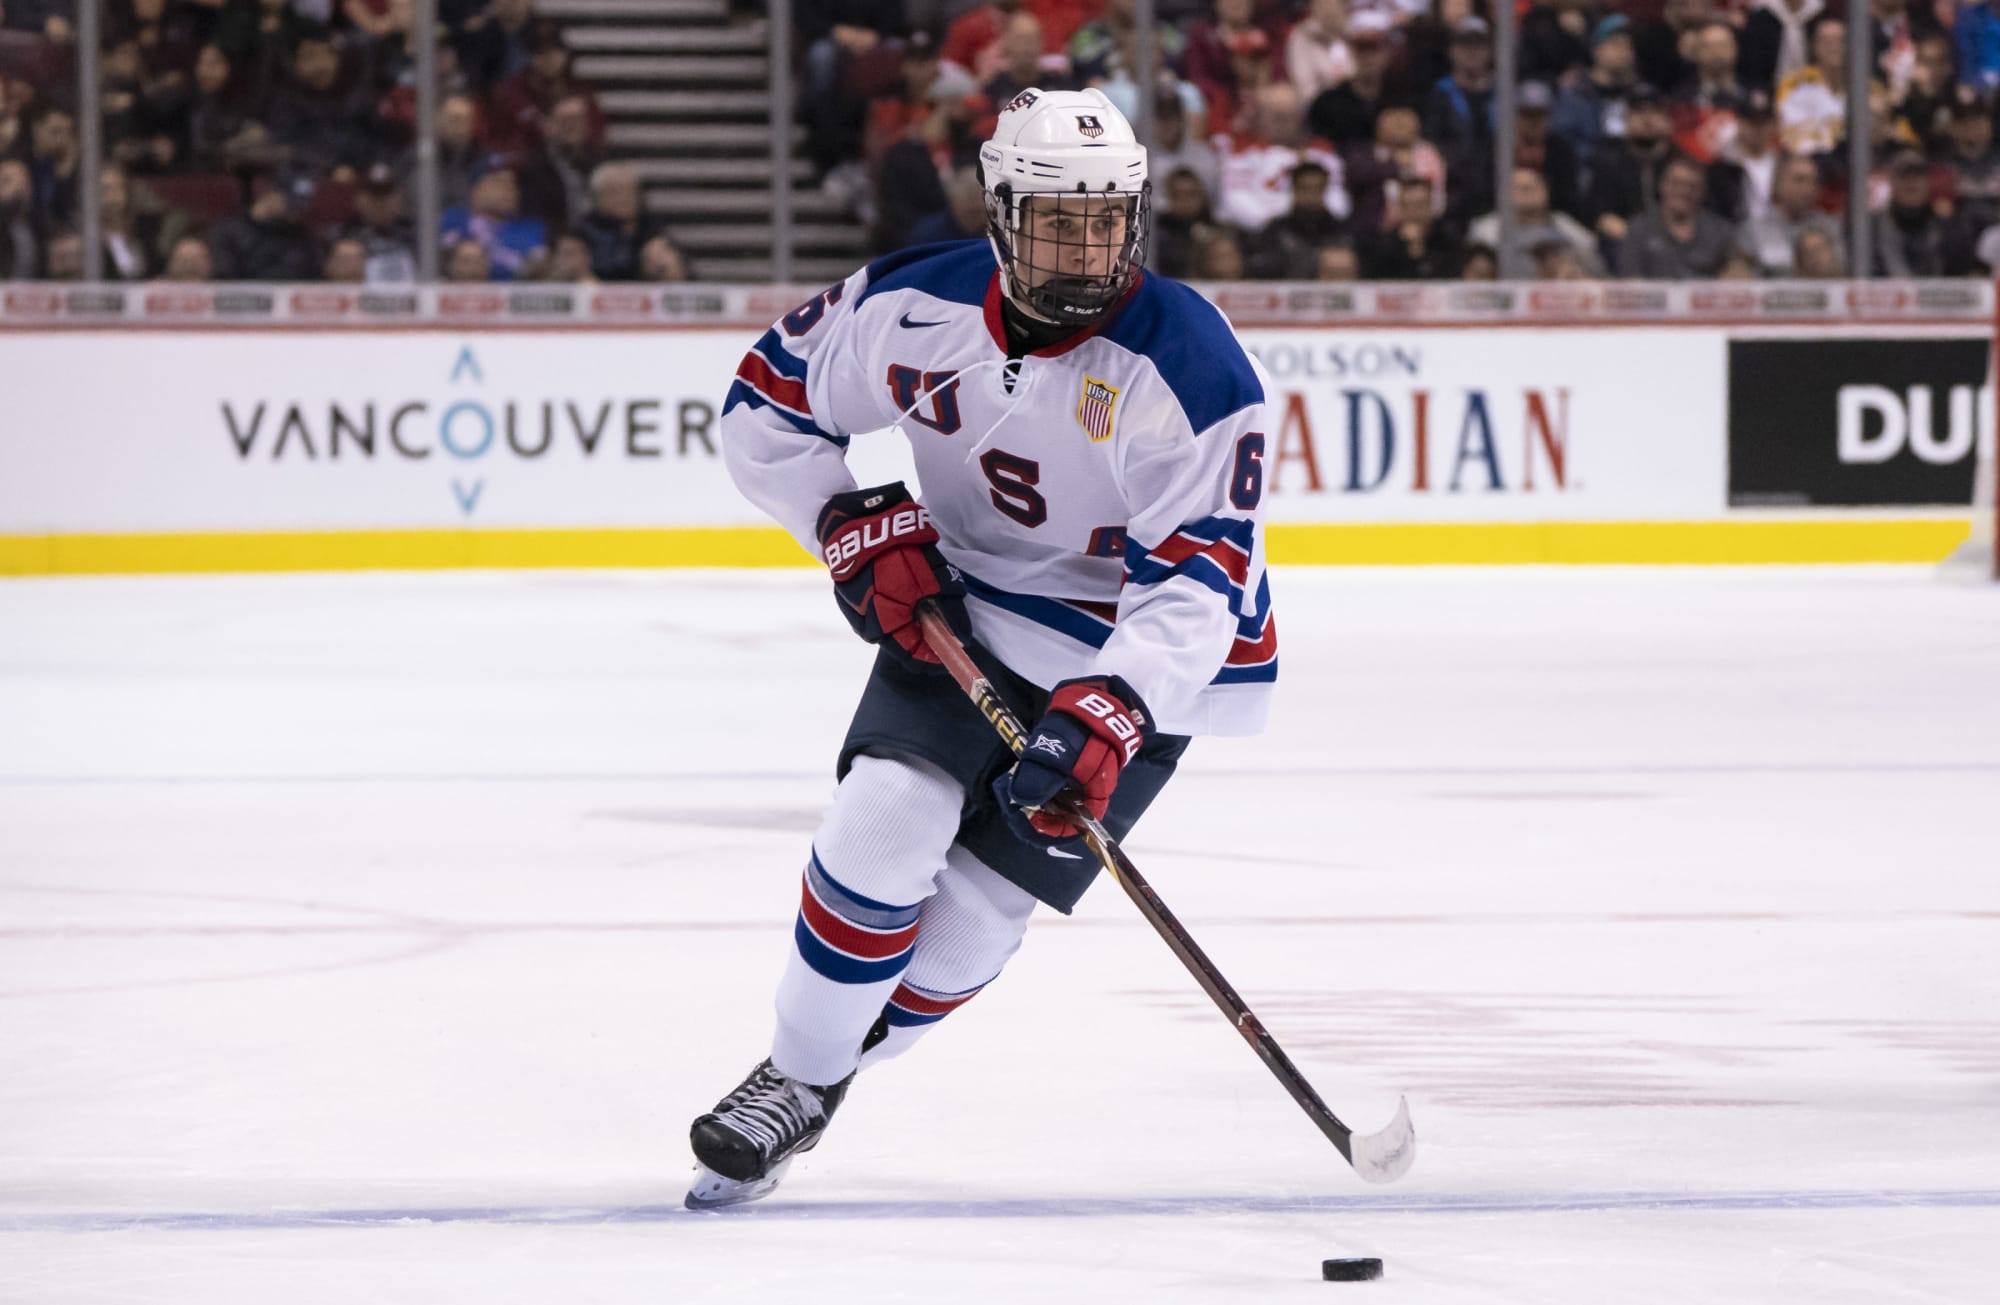 Detroit Red Wings want Jack Hughes bad. And here's why